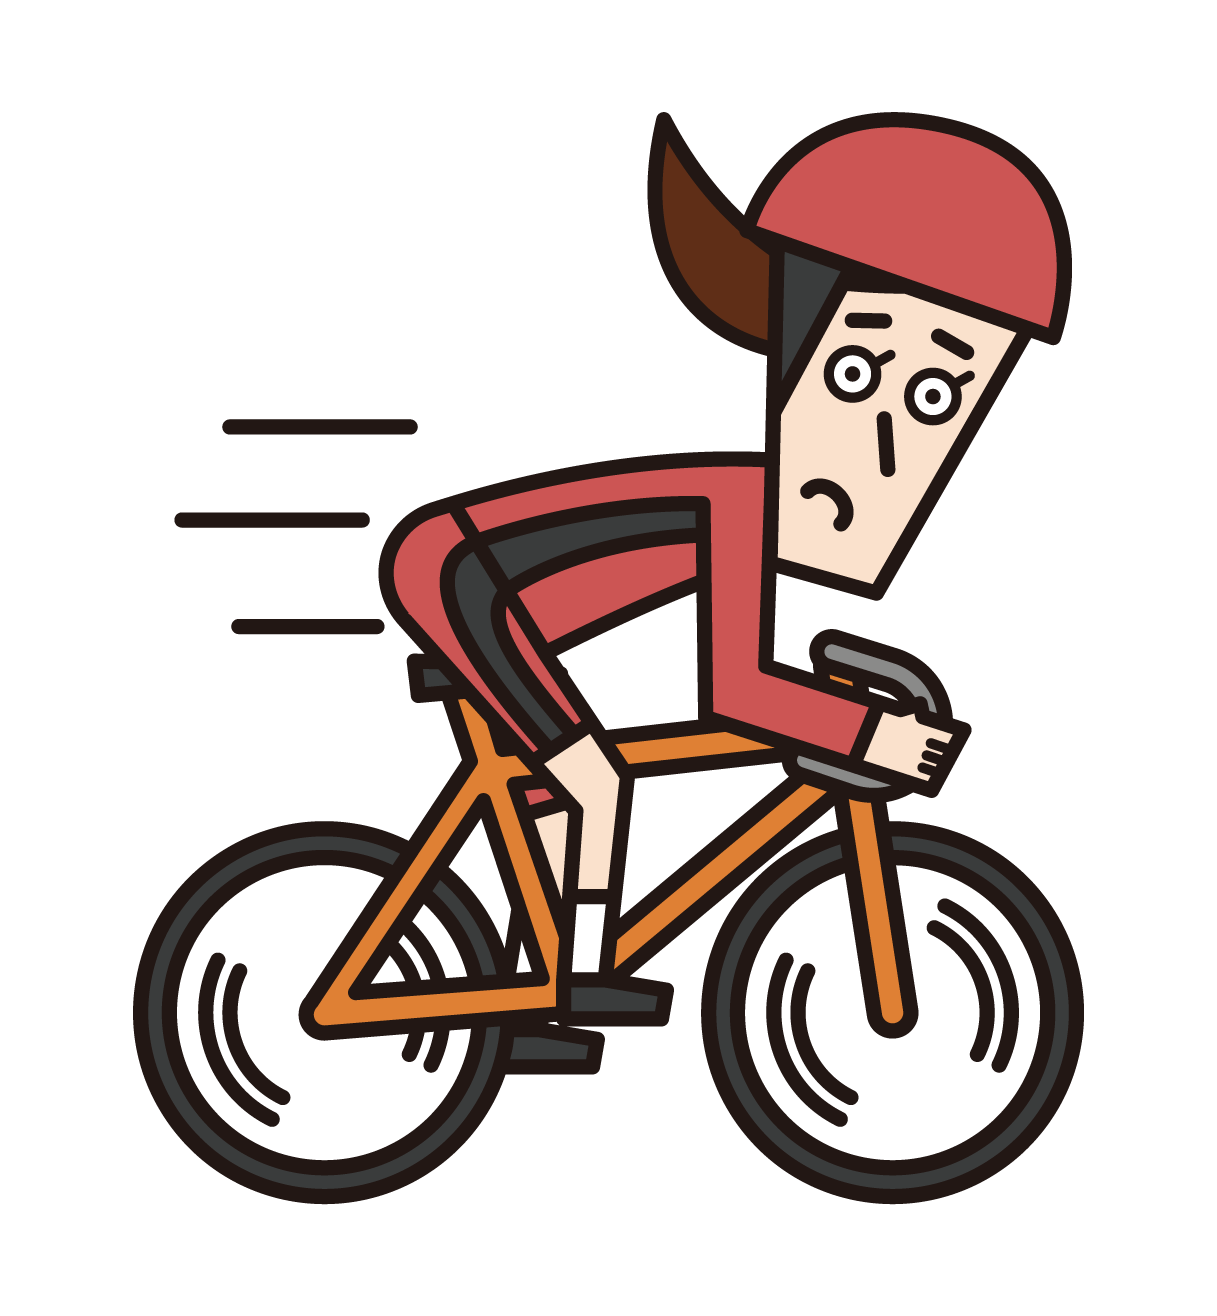 Illustration of a female bicycle racer